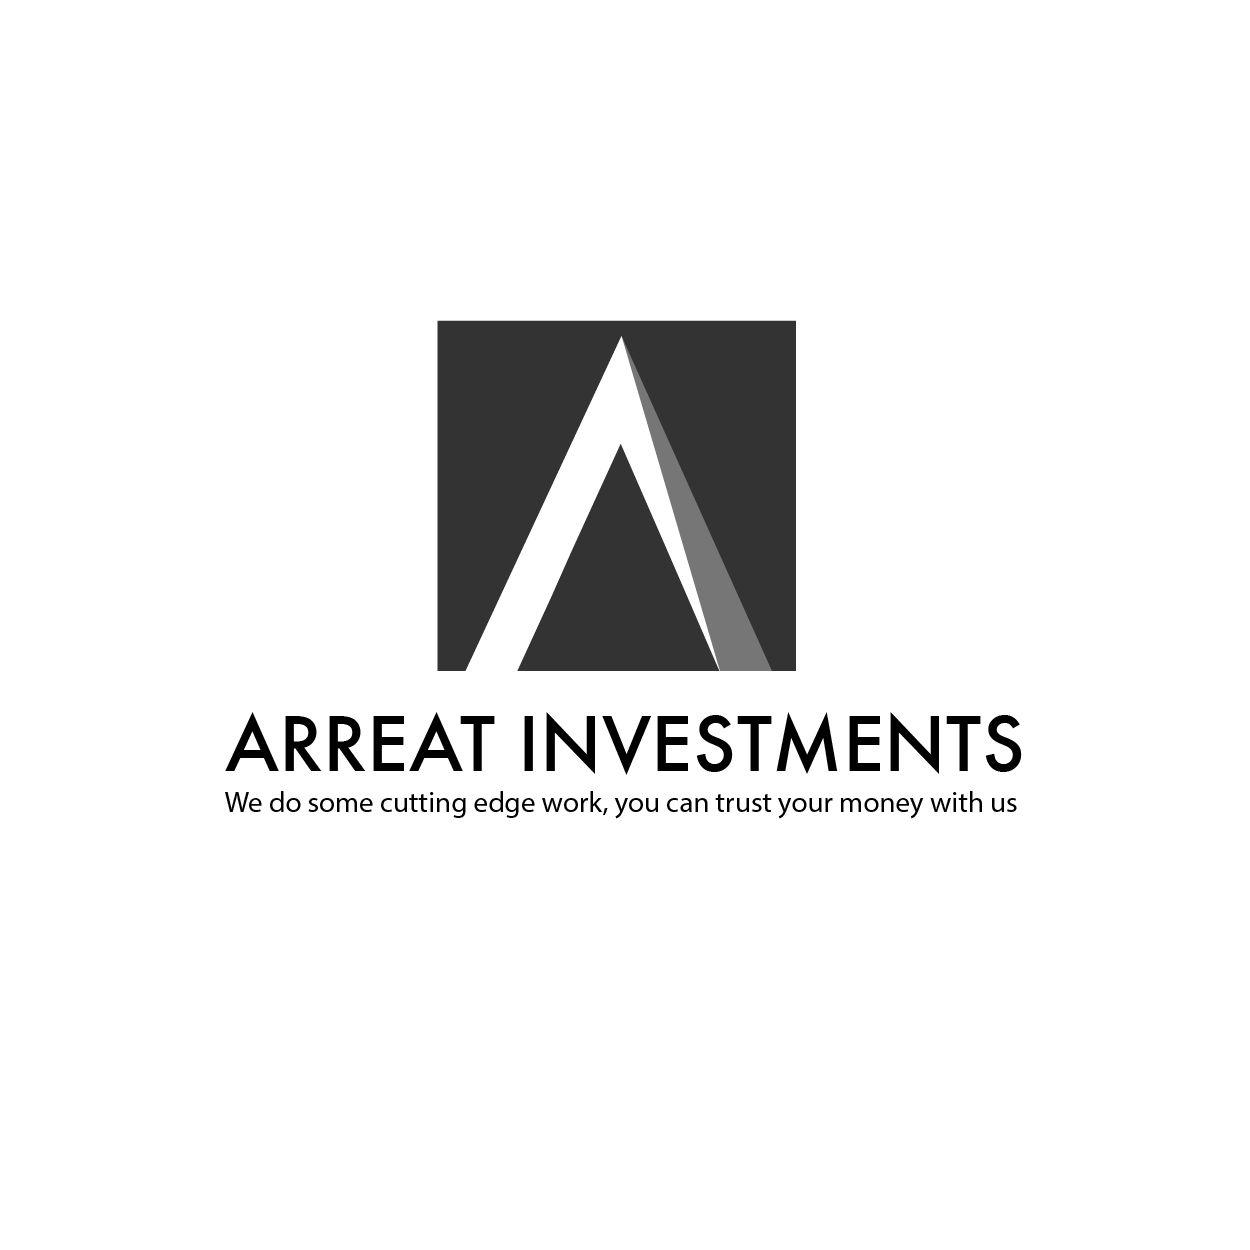 U. S. Invesments Company Logo - Serious, Modern, It Company Logo Design for Arreat Investments or ...